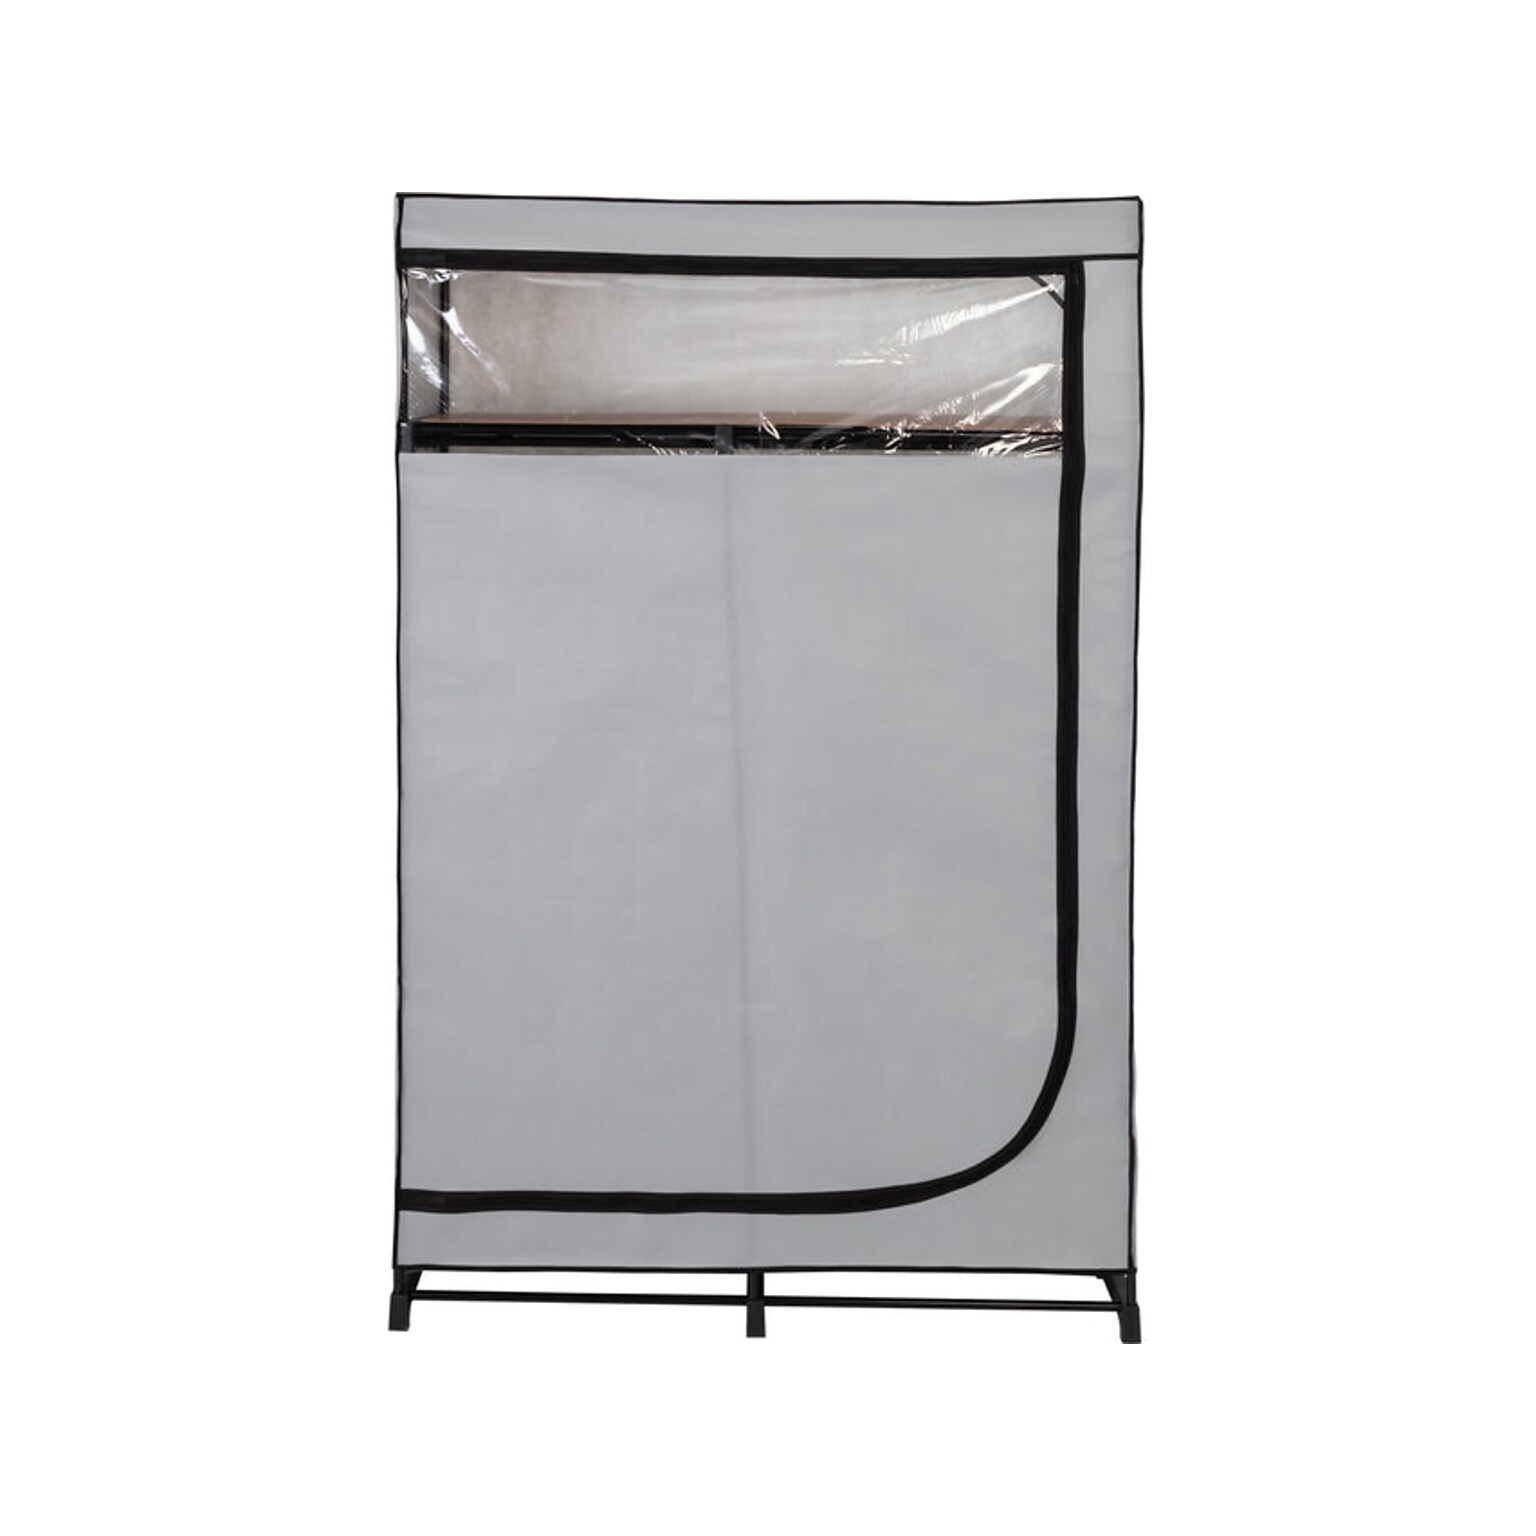 Honey-Can-Do 69 x 46 Portable Wardrobe Closet with Cover and Shelf Gray/Black, Steel/Polyester (WRD-09196)